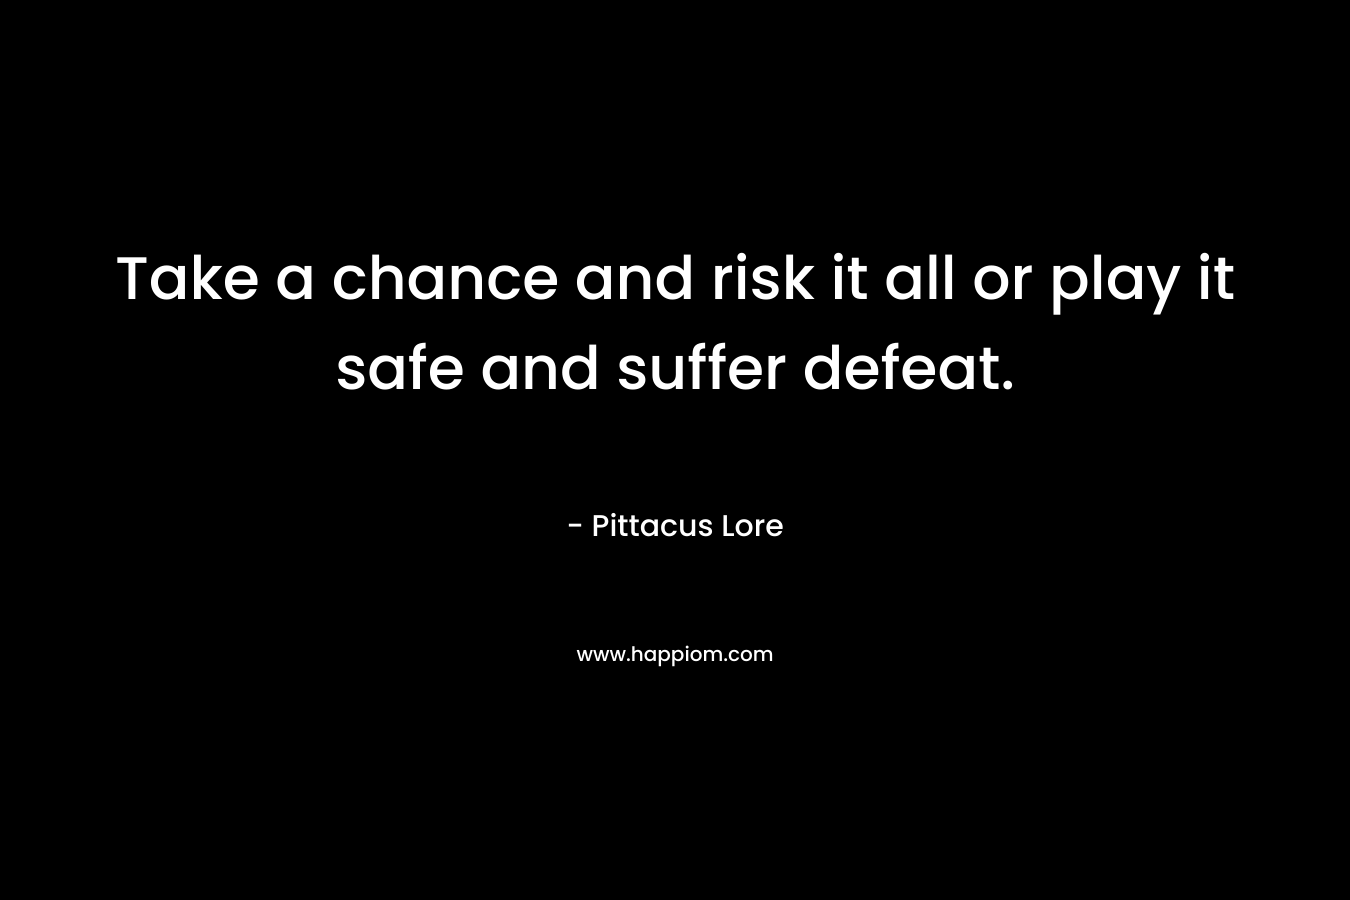 Take a chance and risk it all or play it safe and suffer defeat. – Pittacus Lore